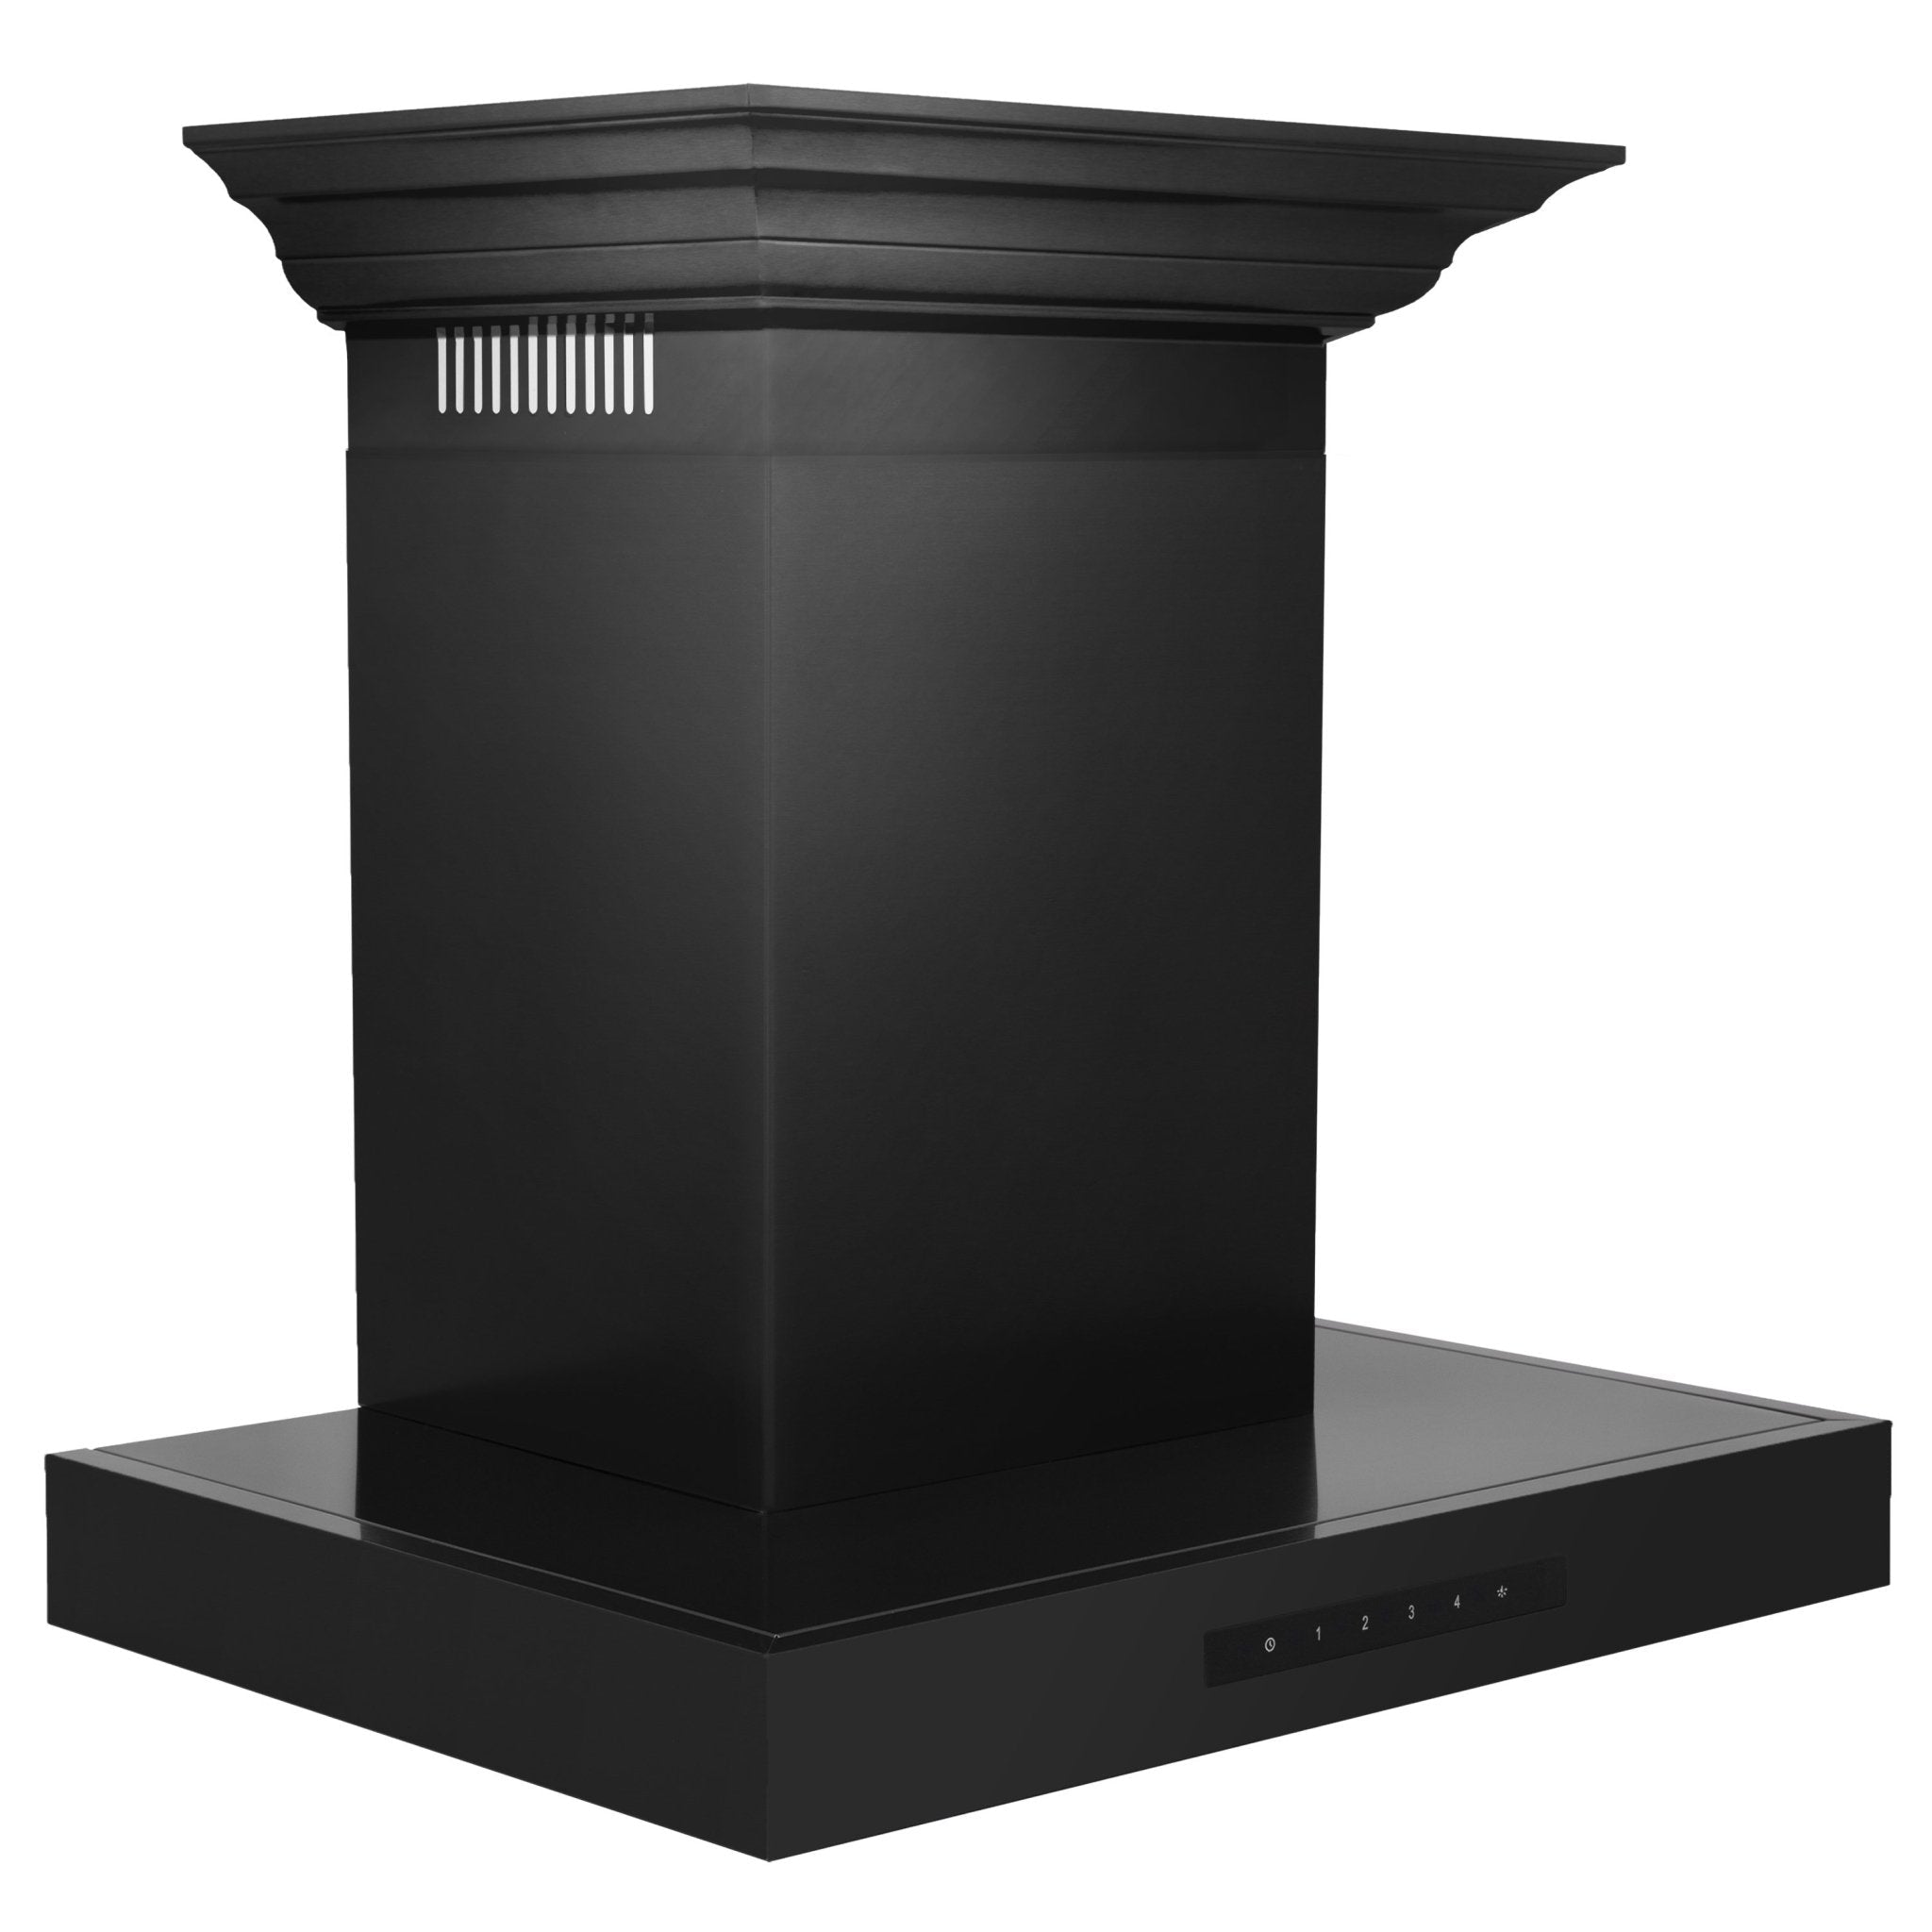 ZLINE Convertible Vent Wall Mount Range Hood in Black Stainless Steel with Crown Molding (BSKENCRN) side top showing vented crown molding and flat canopy.